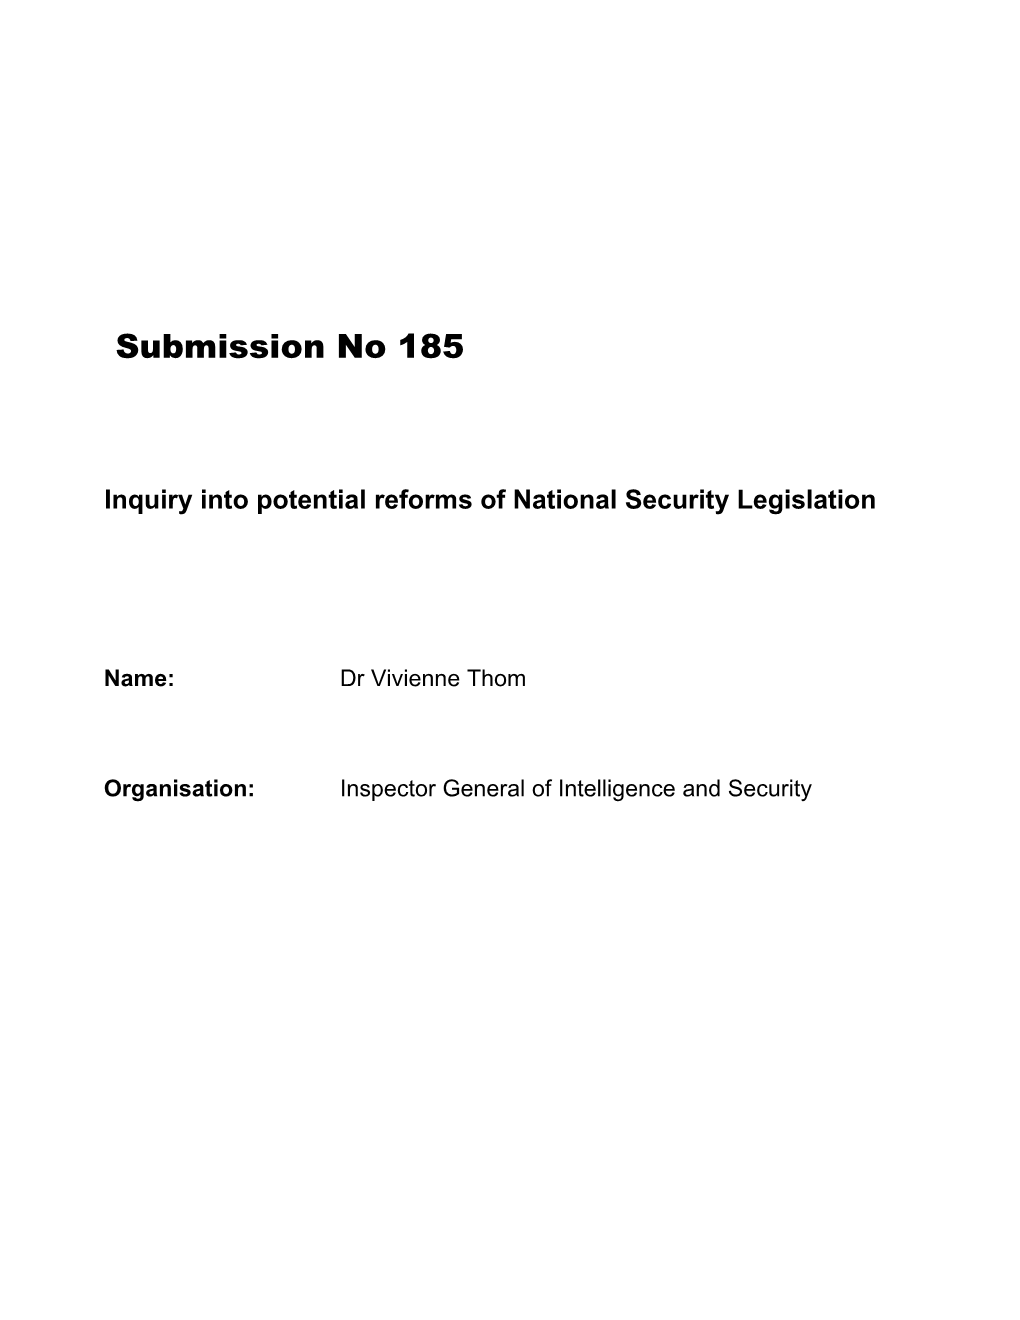 Submission to the Parliamentary Joint Committee on Intelligence and Security